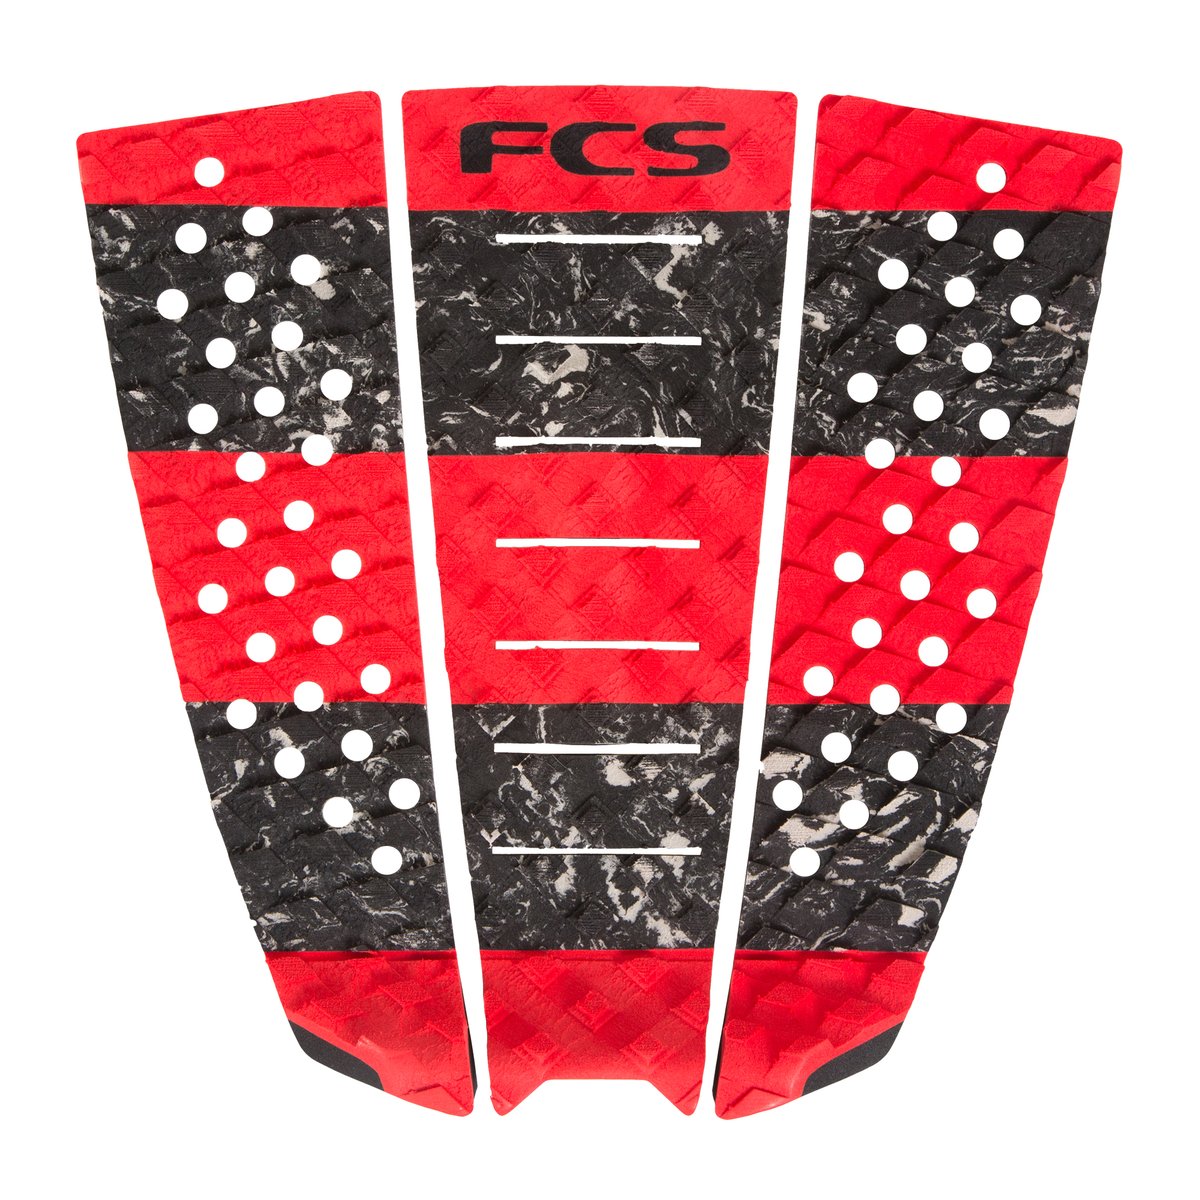 FCS Jeremy Flores Signature Traction Pad Traction Pad RED